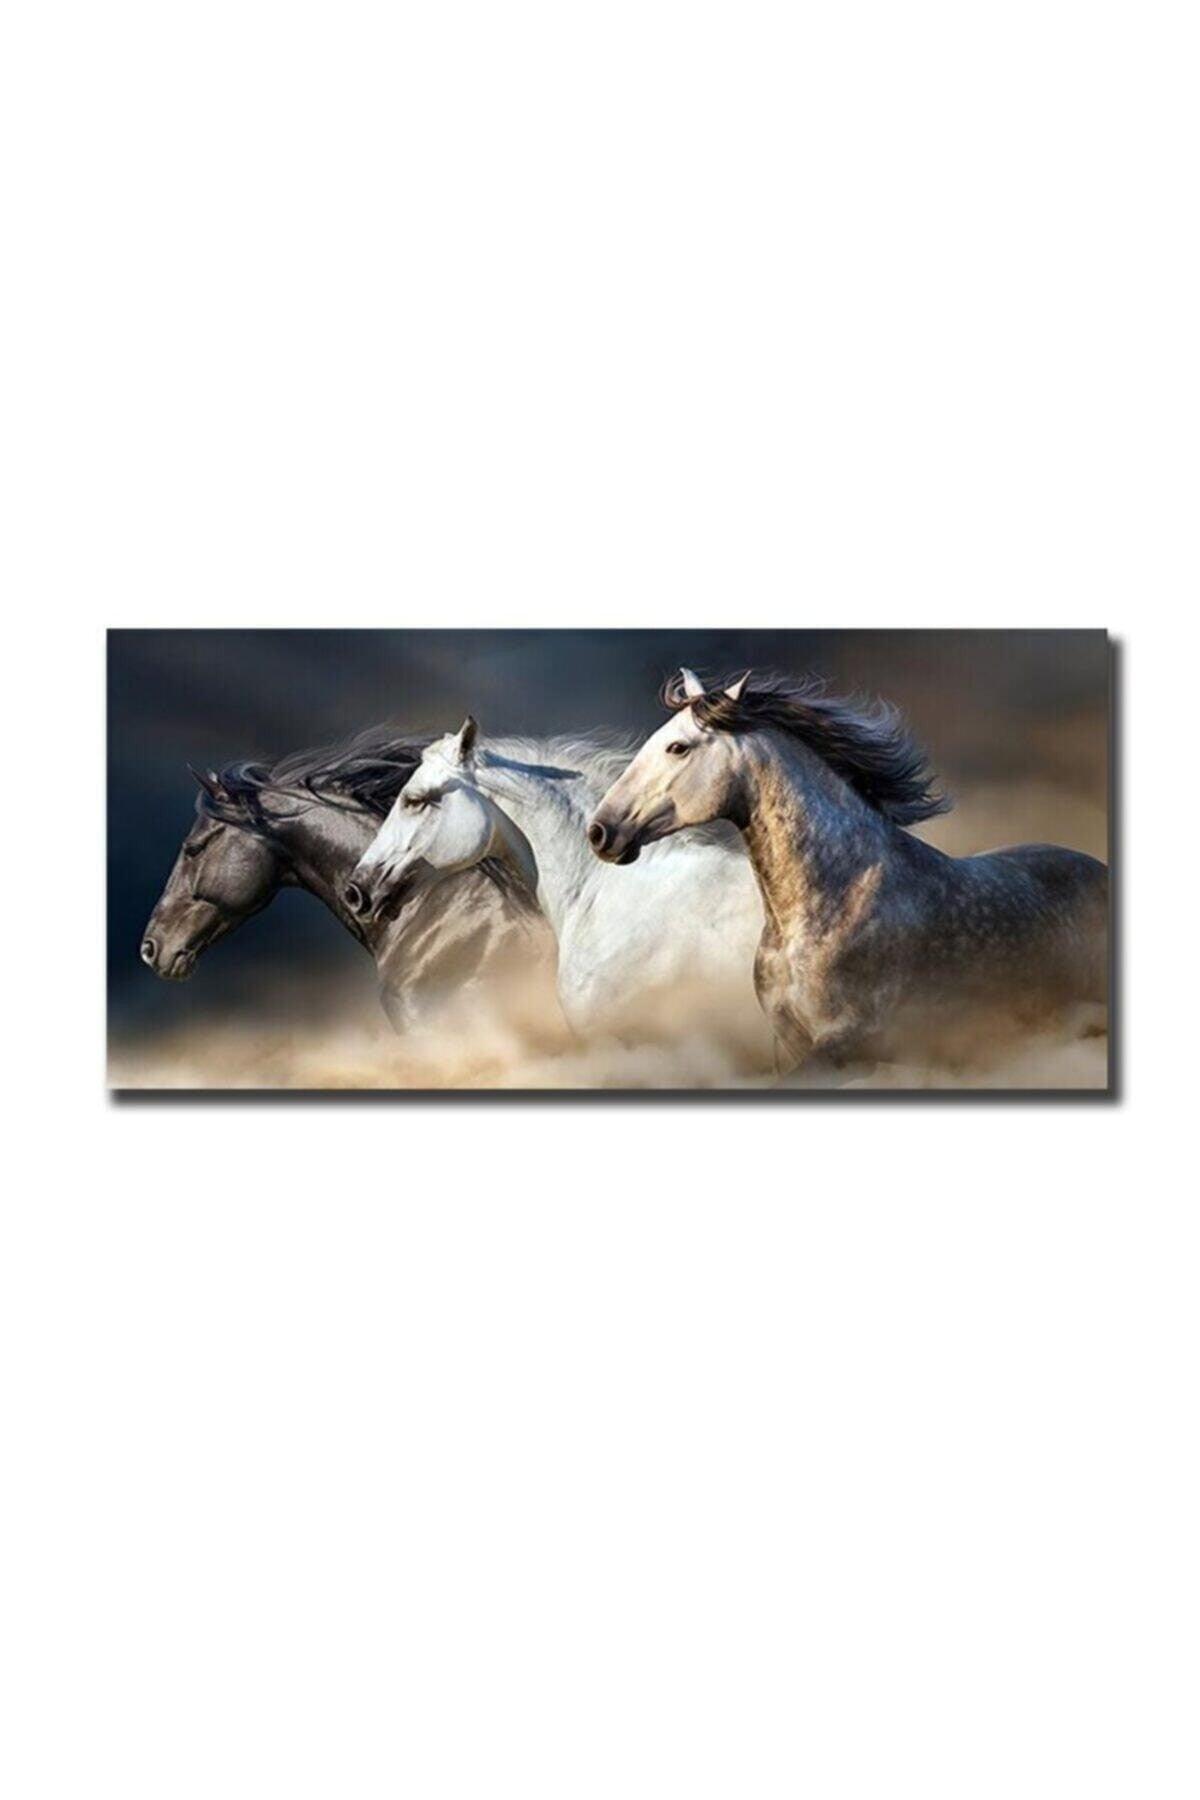 Horse Painting Decoration Canvas Painting - Swordslife